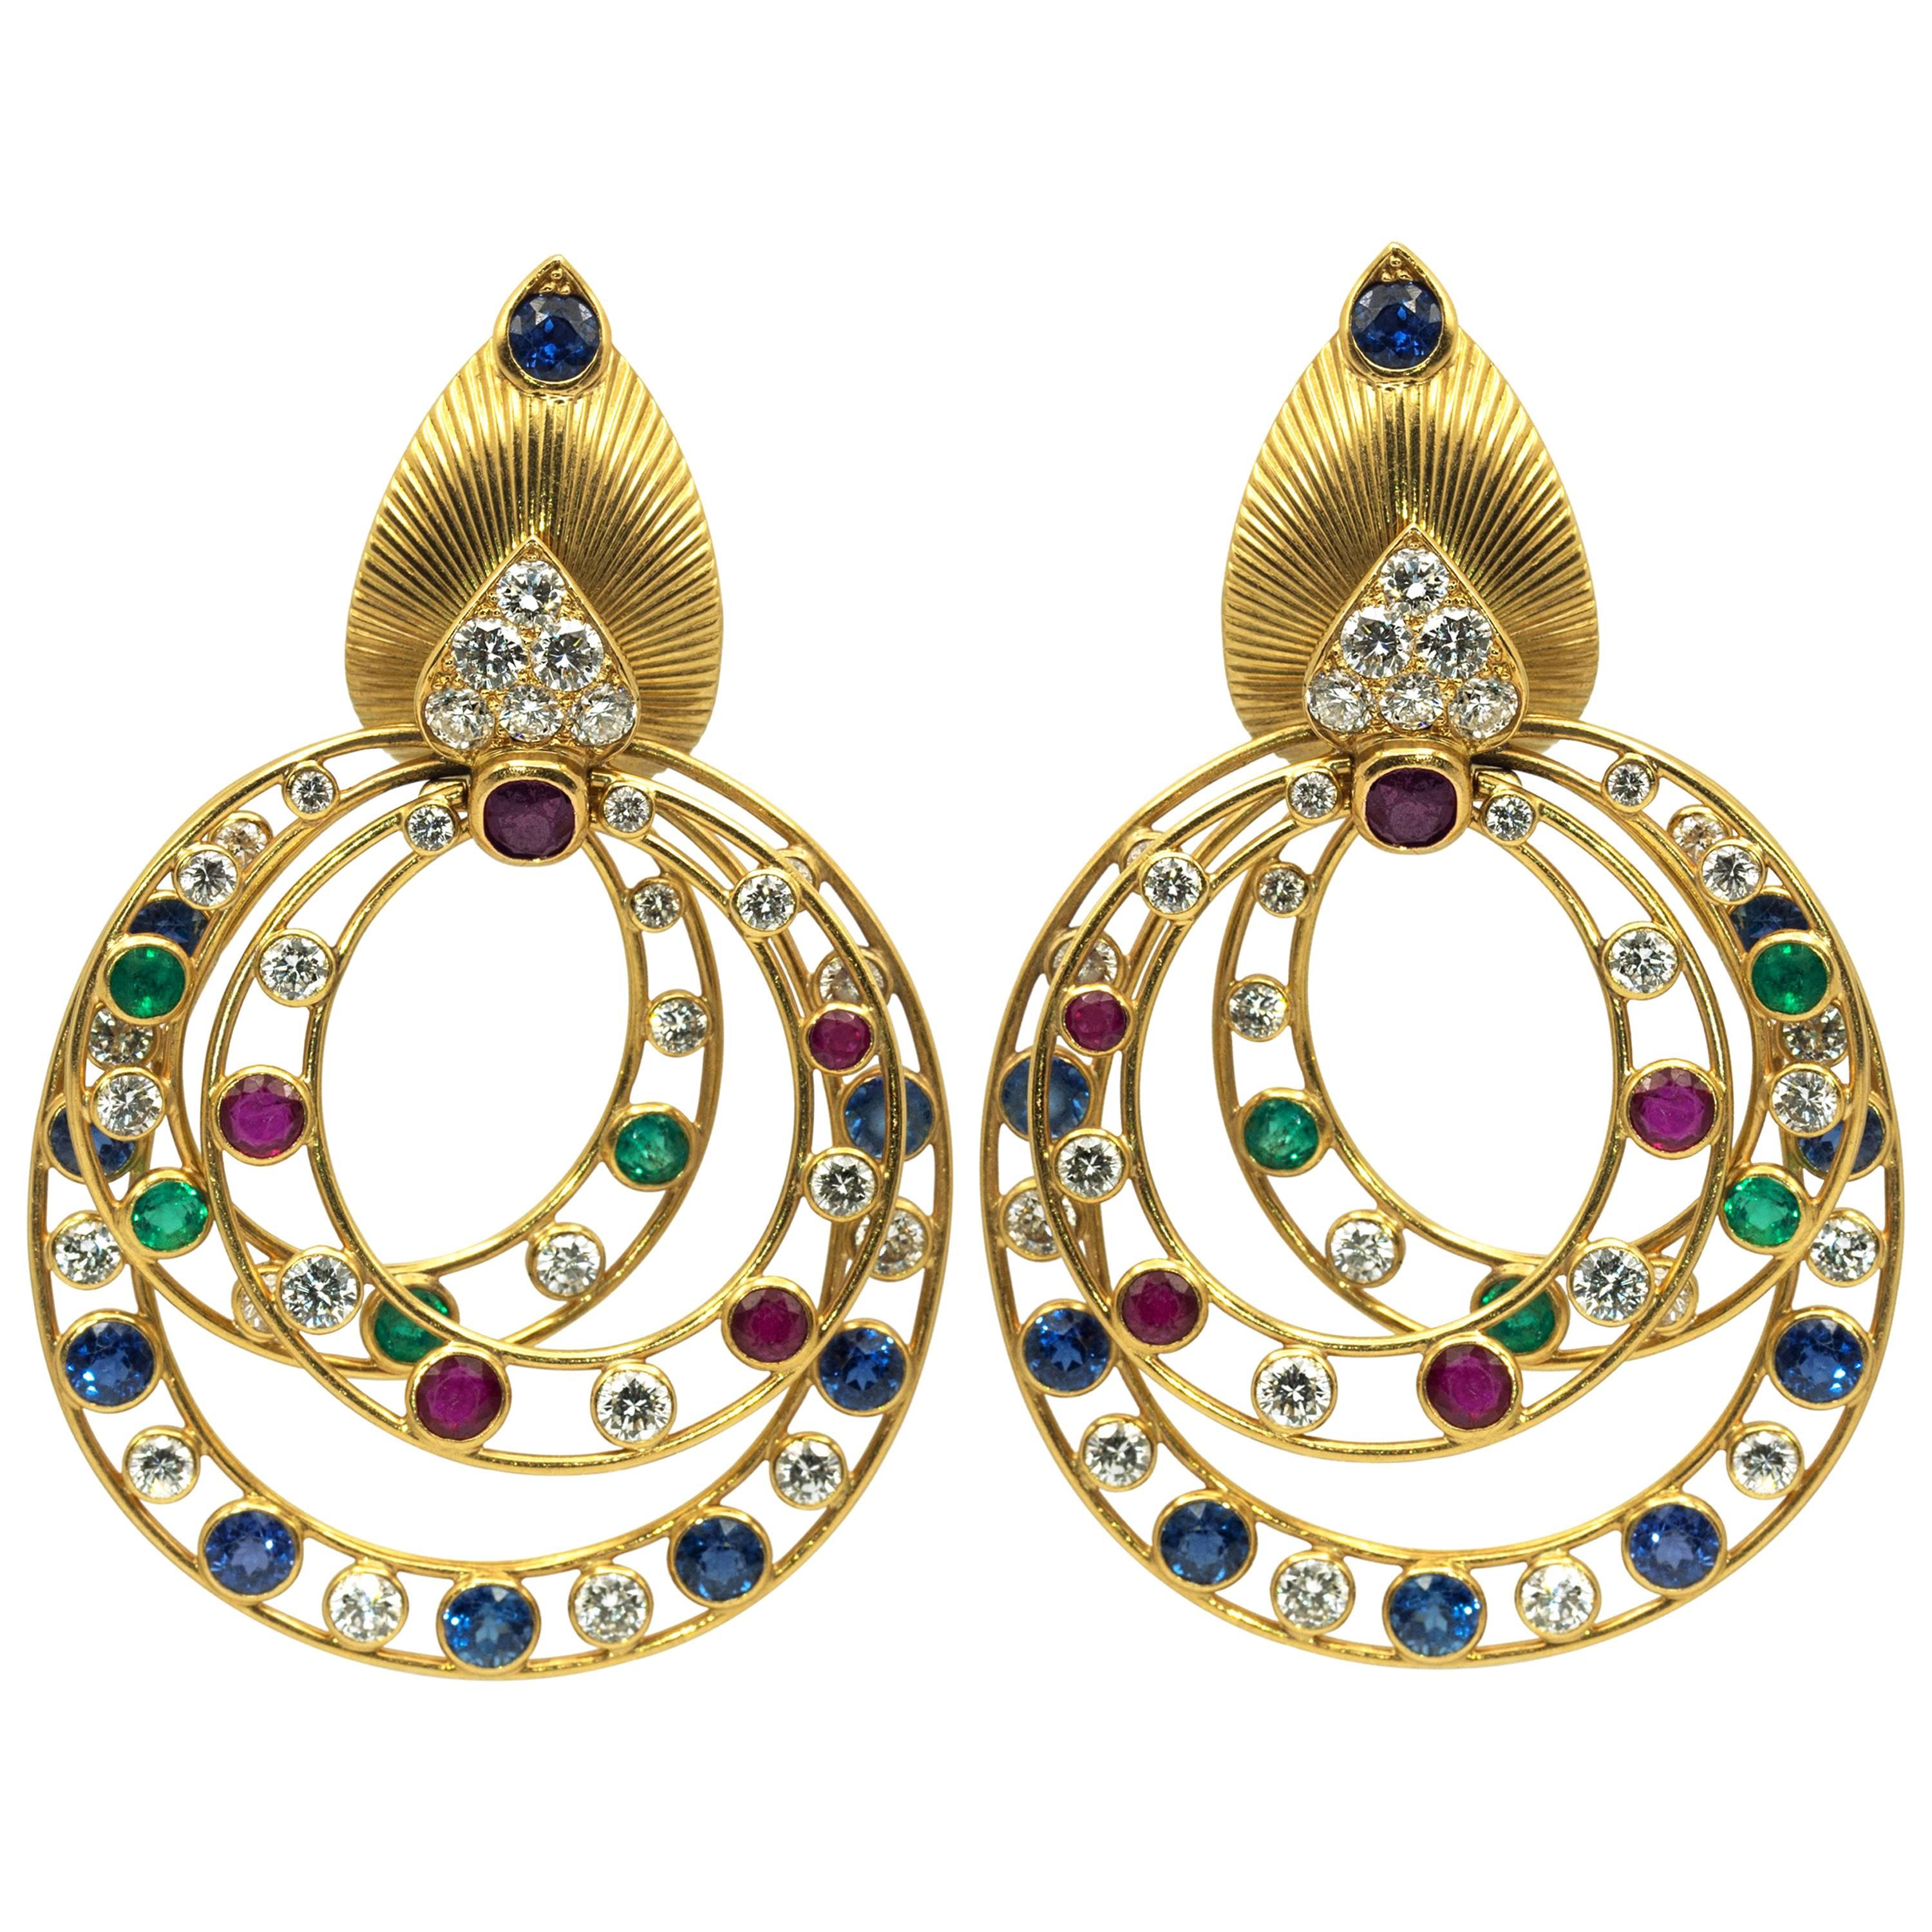 Cartier Earrings 1950 Yellow Gold Diamonds, Ruby, Sapphire and Emeralds